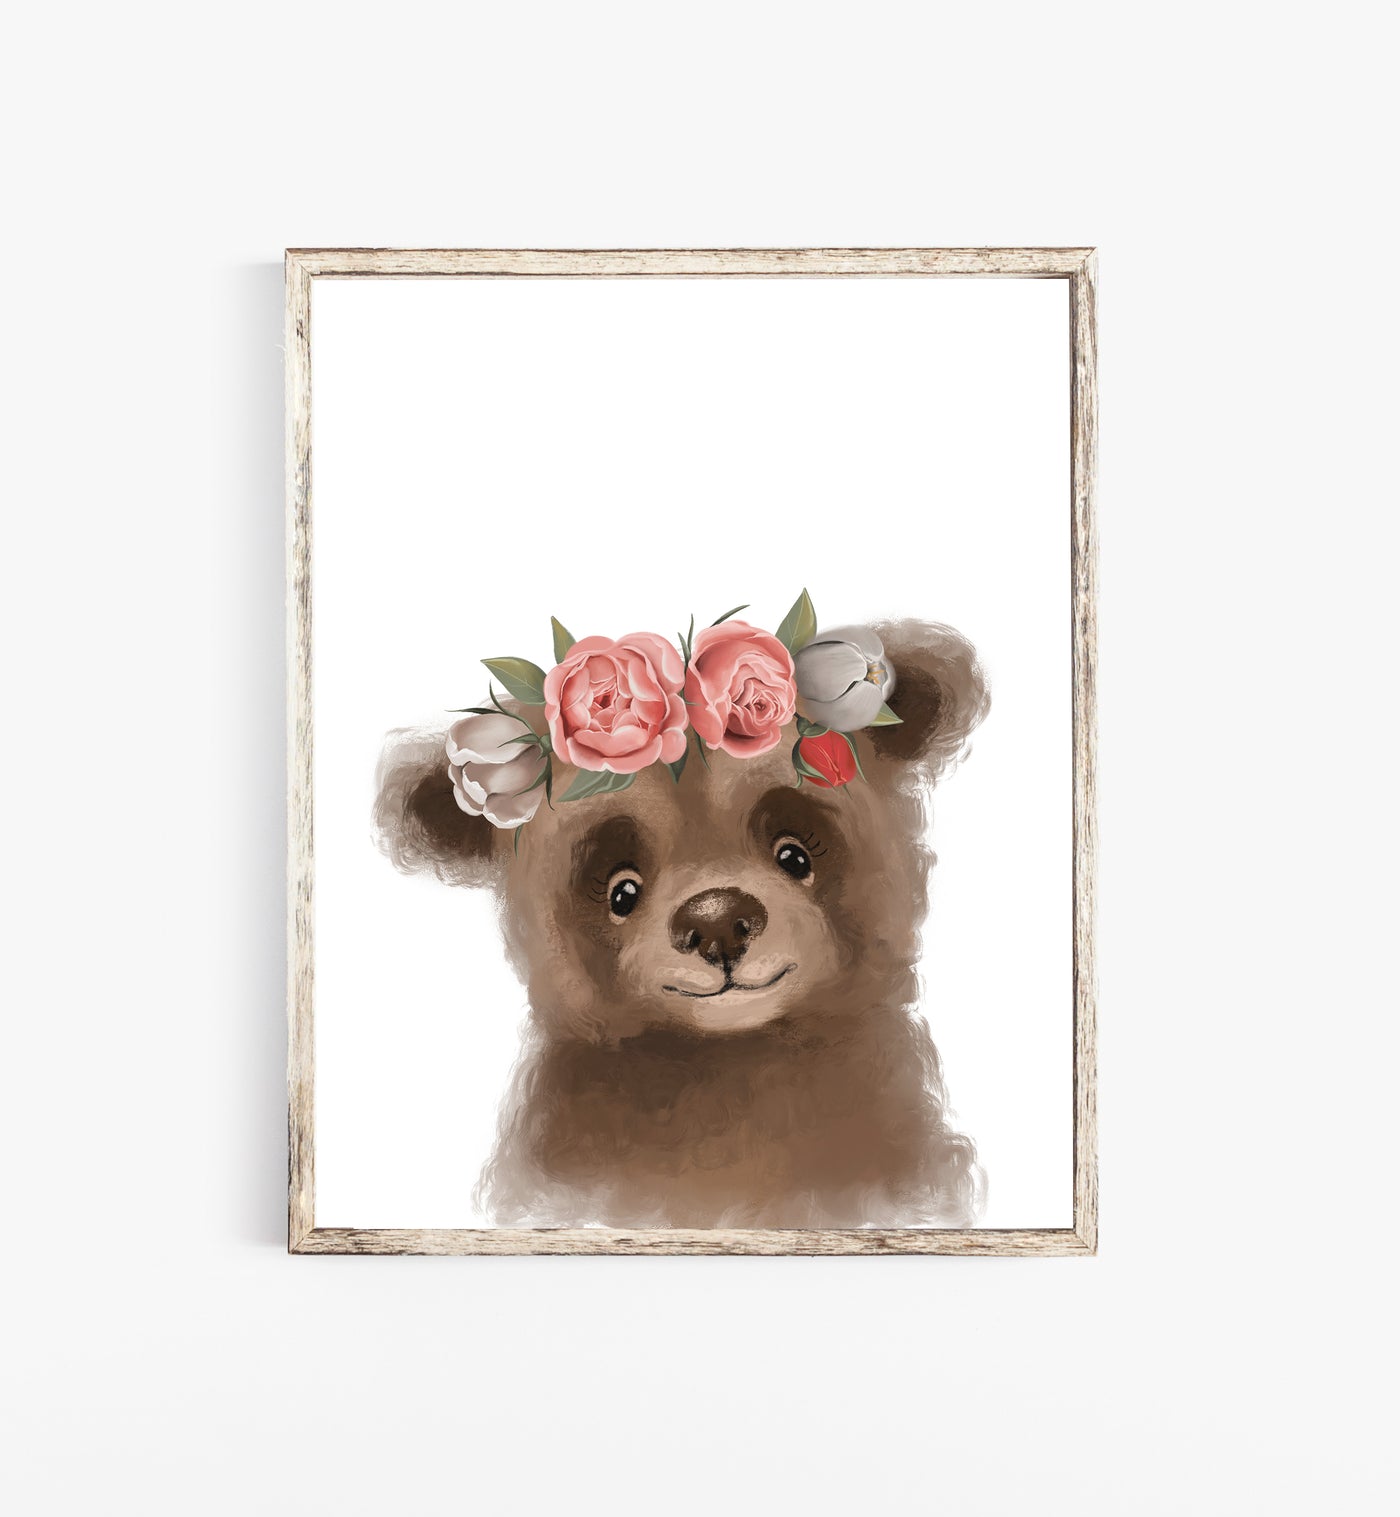 bear with flower crown